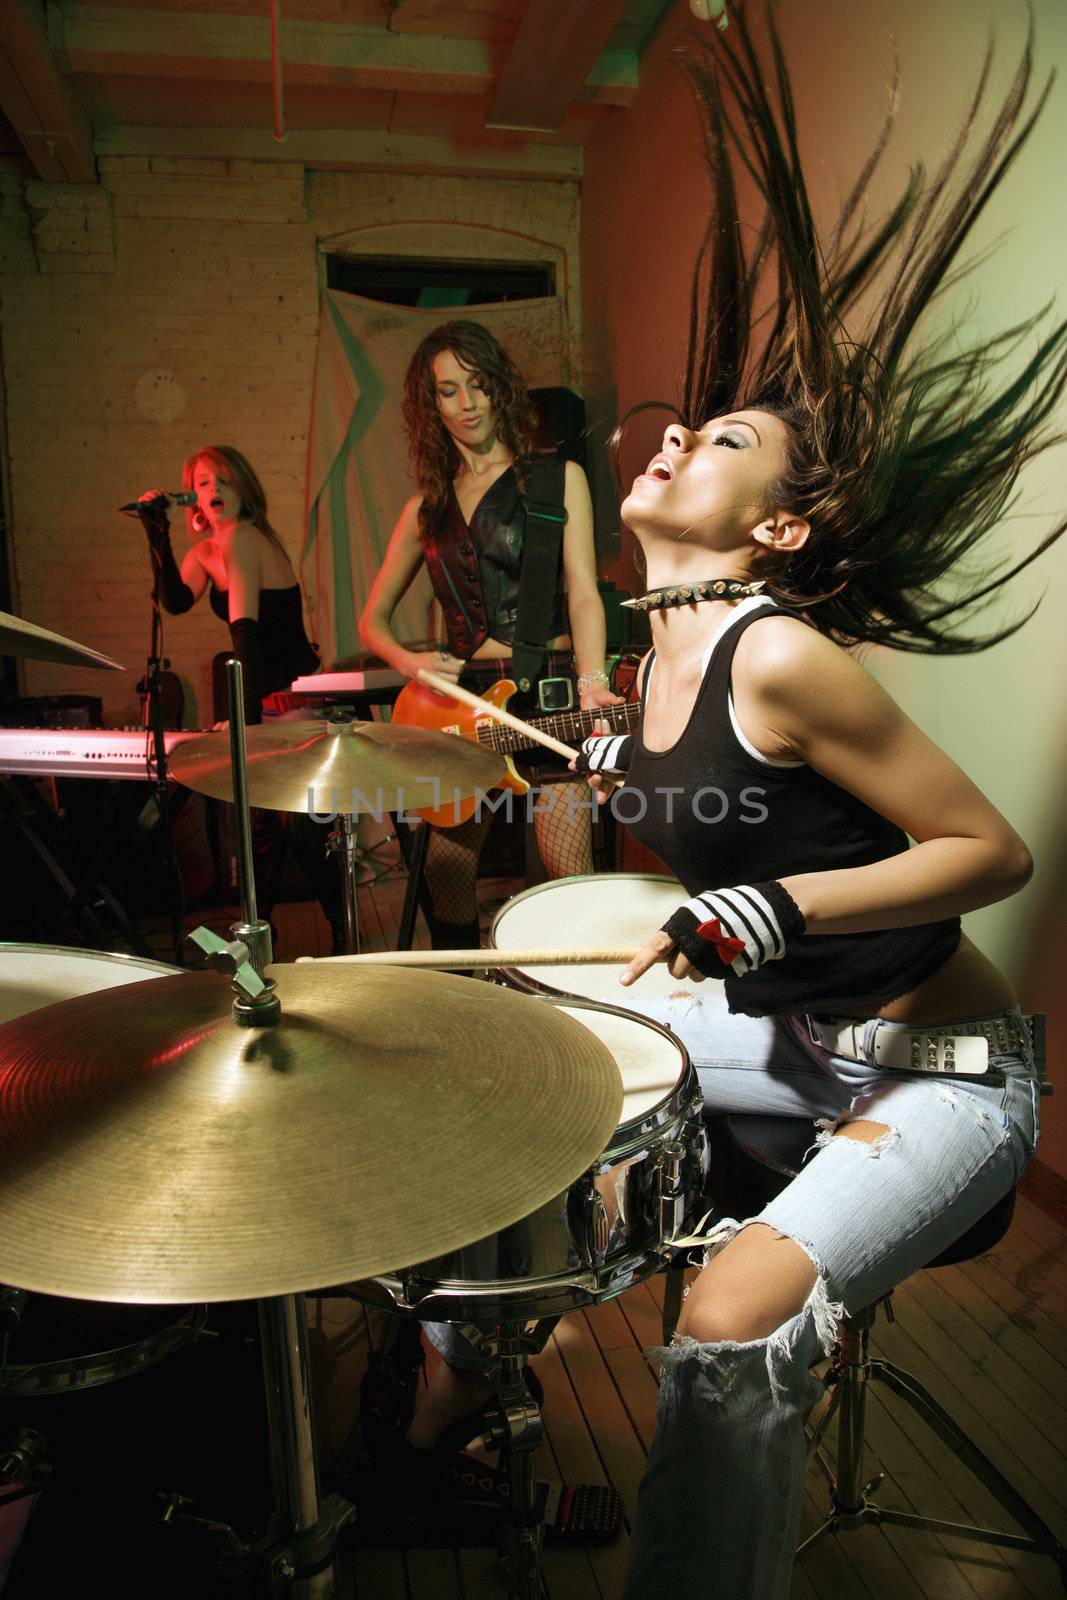 Caucasian girl band playing instruments.